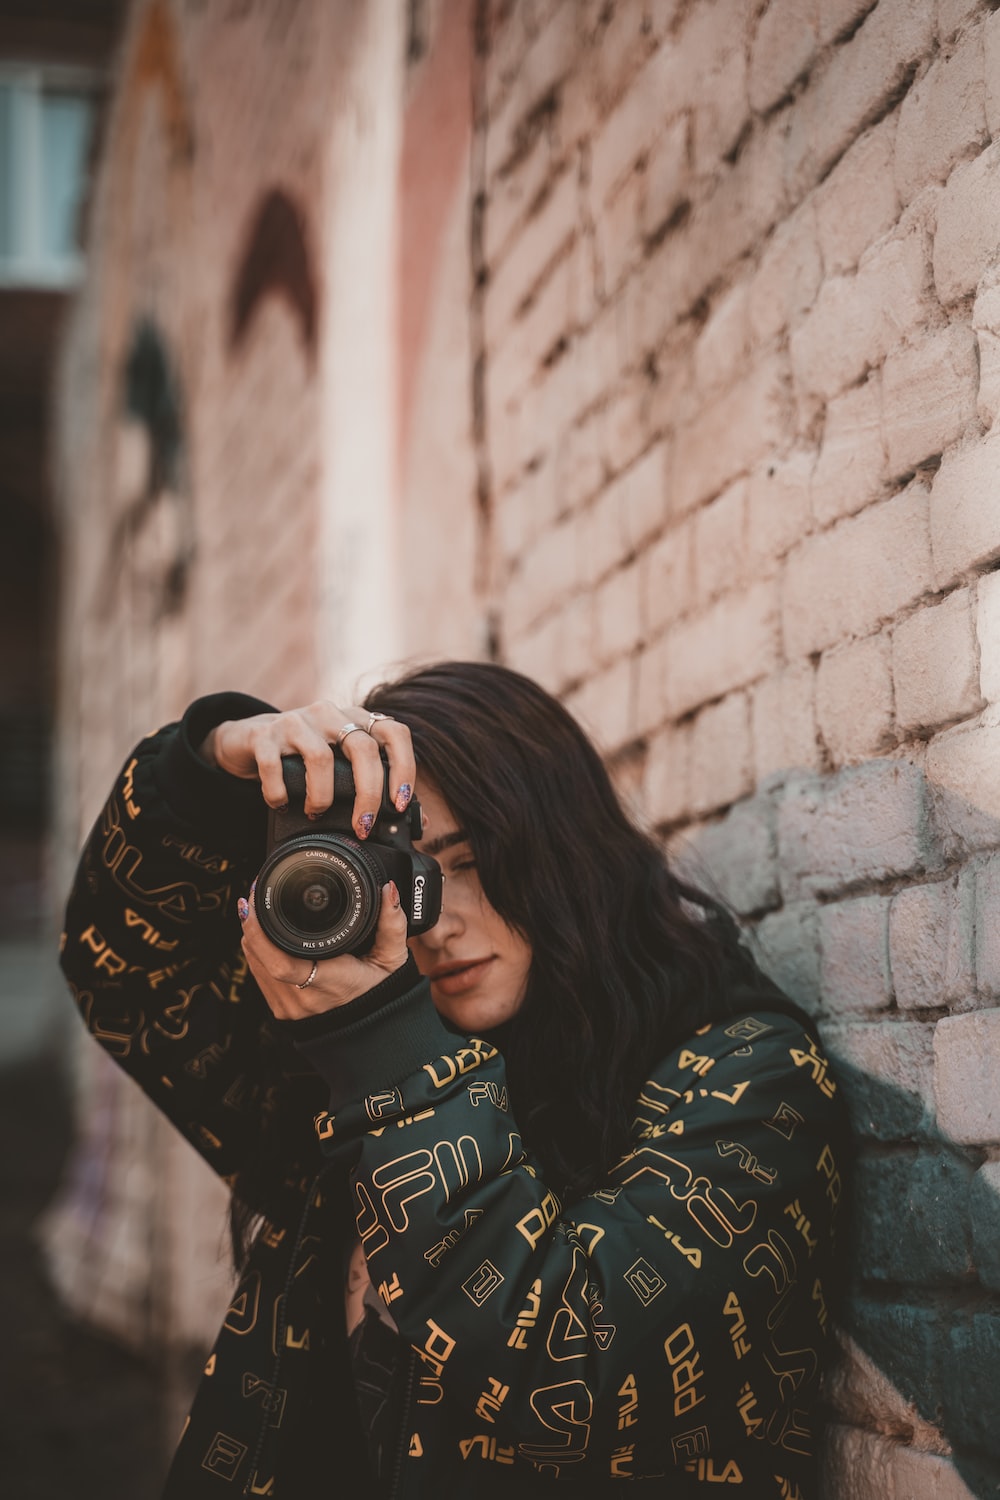 Girl with camera pictures download free images on